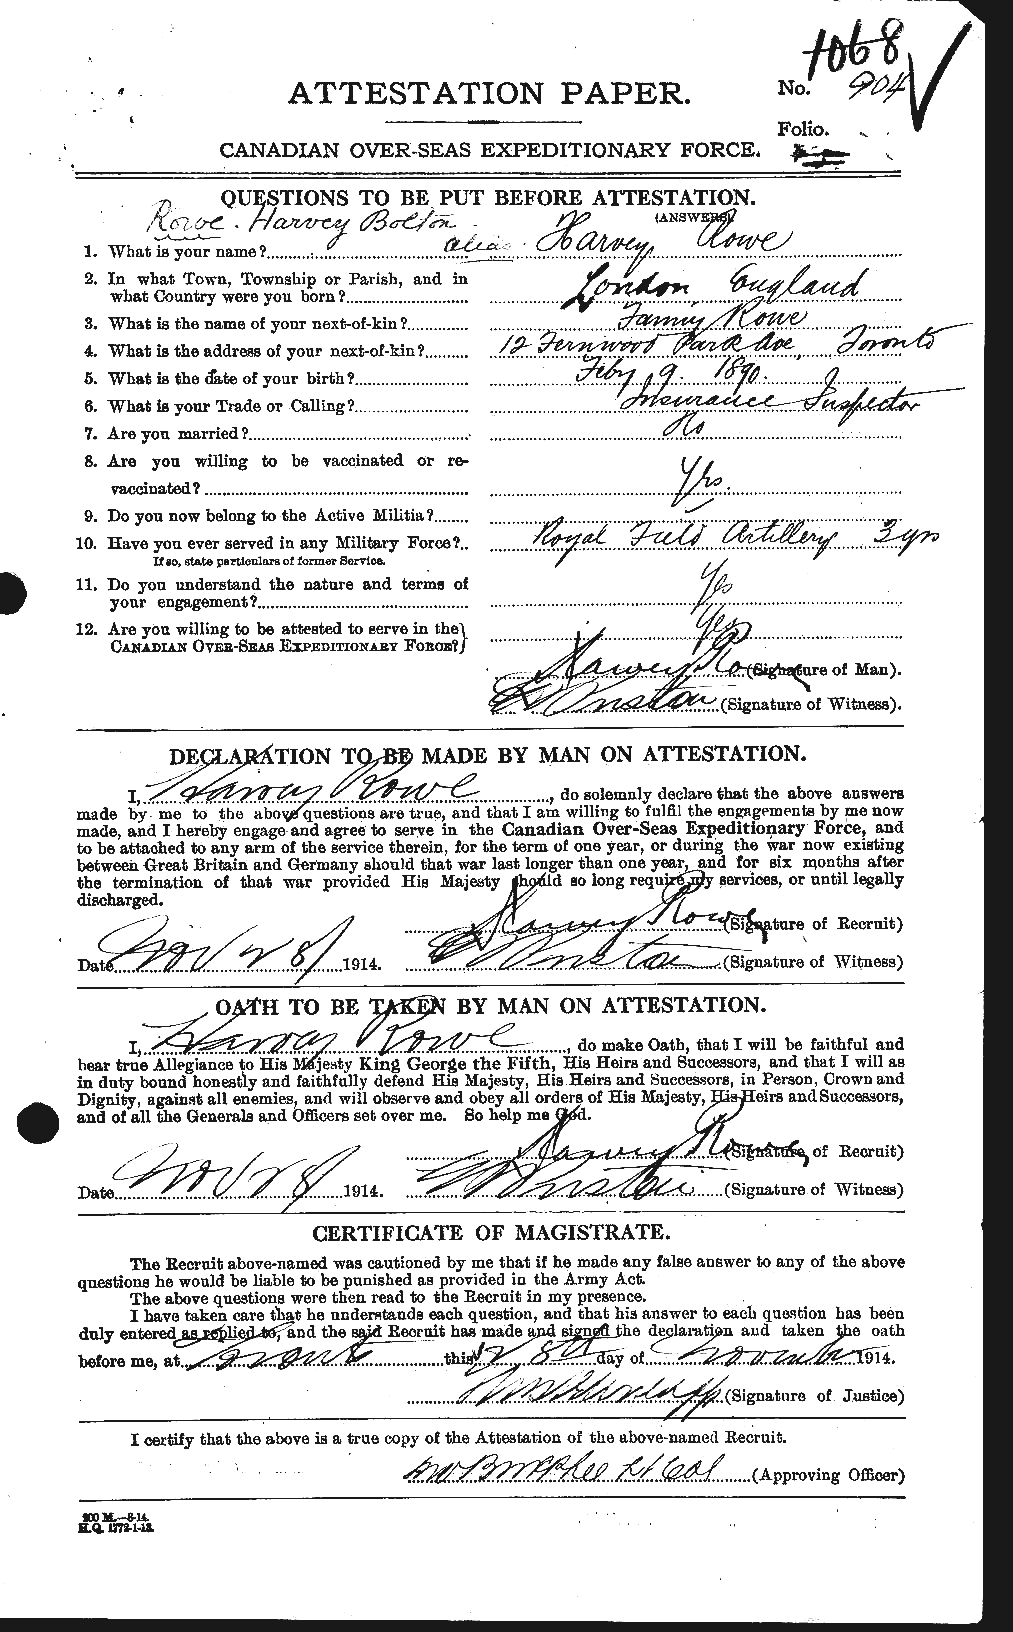 Personnel Records of the First World War - CEF 615896a